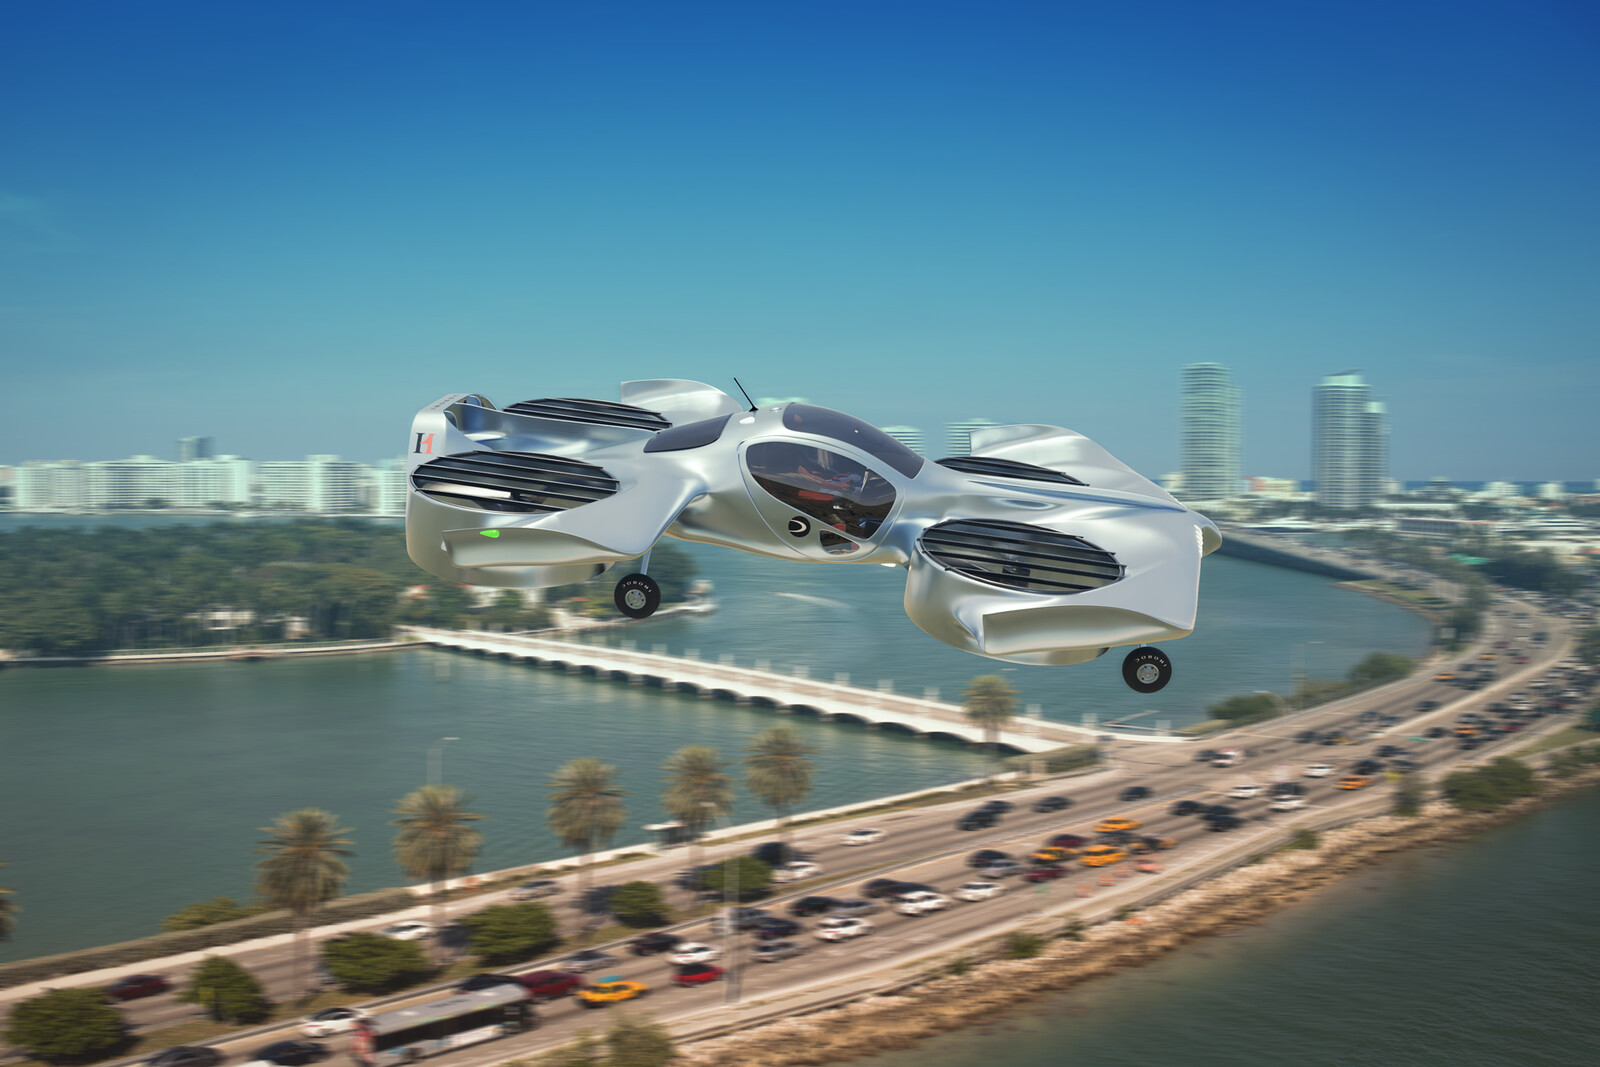 Flying over Miami - 3D vehicle comped over a photo via the use of FSpy